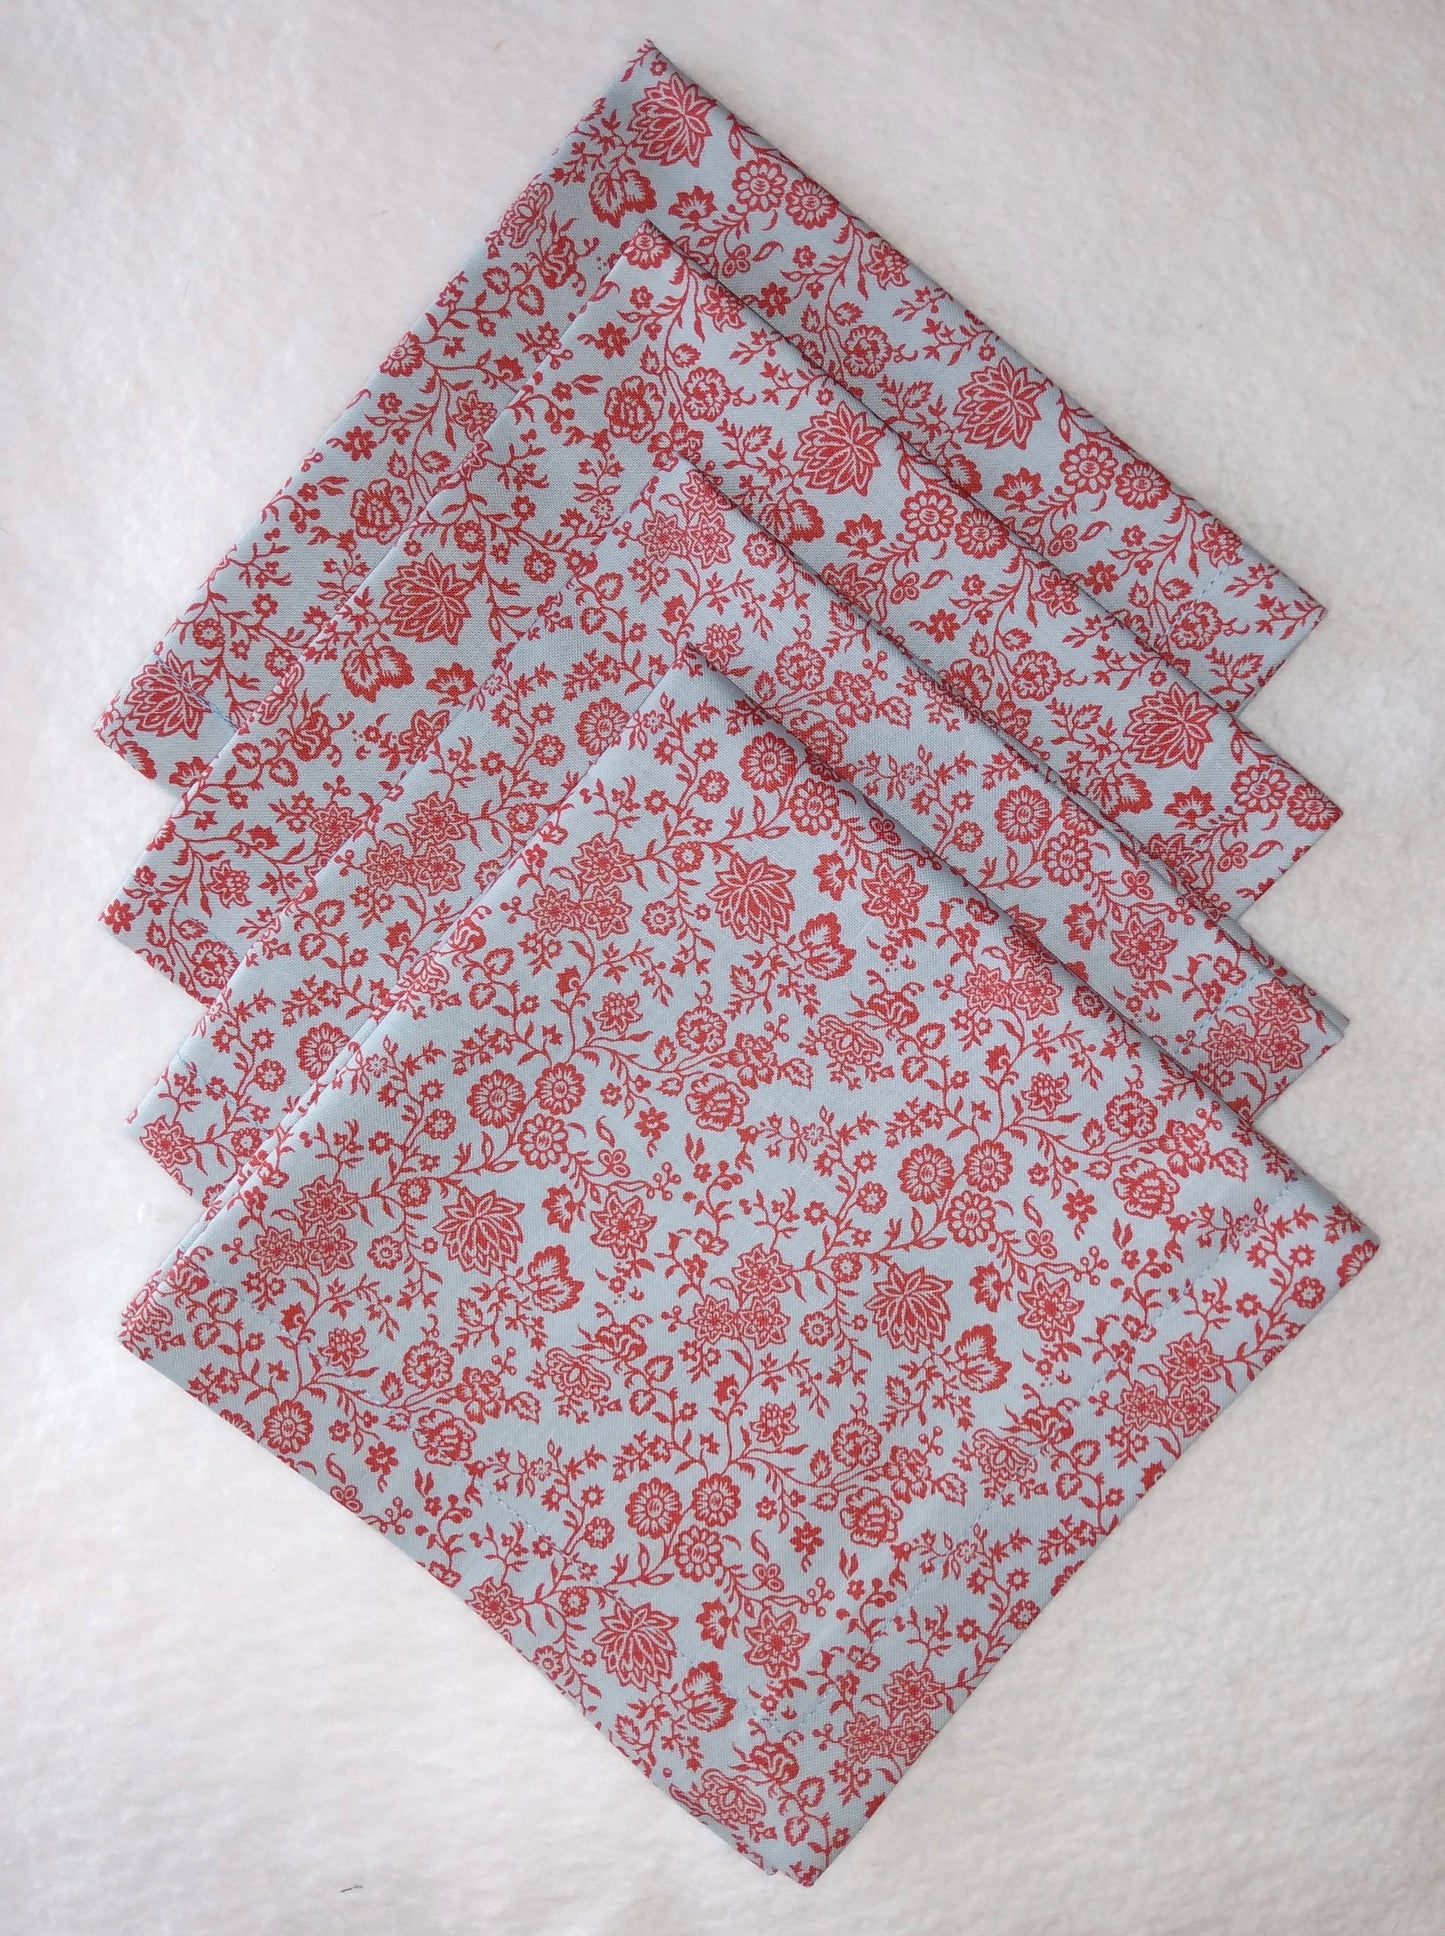 Napkins 100% Liberty Print Cotton Red Floral Light Blue 2 Lunch